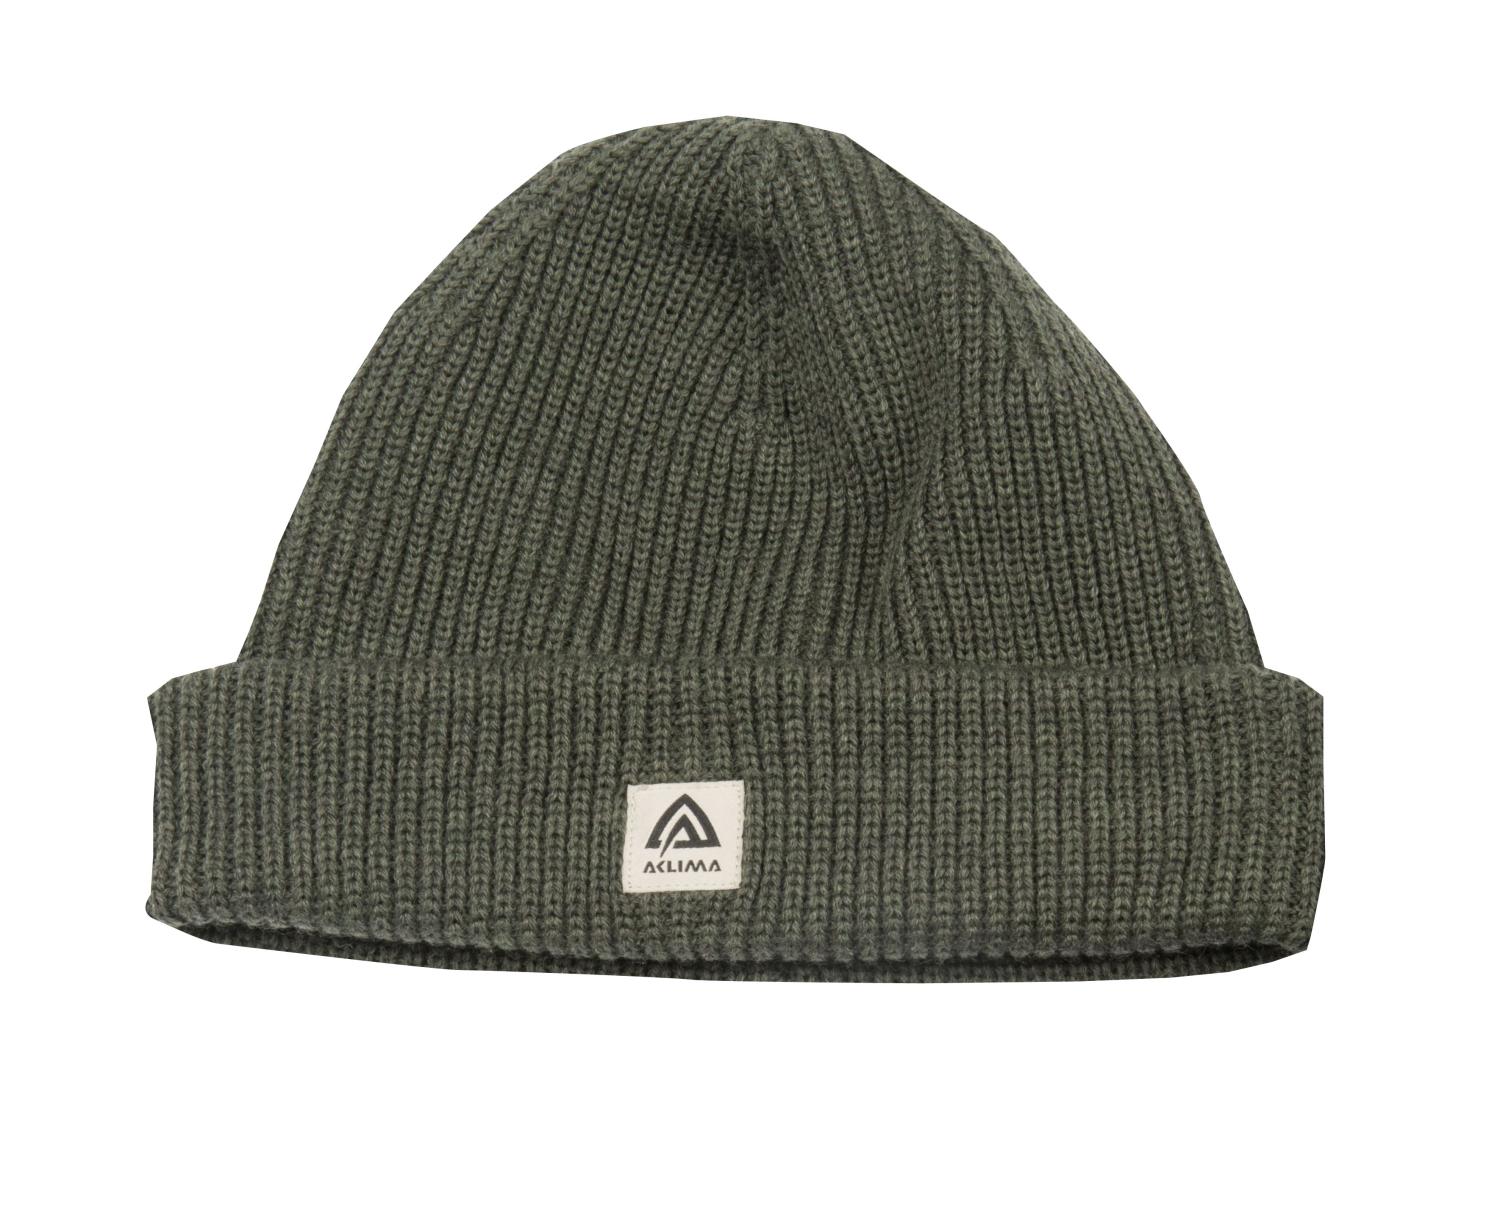 Forester cap